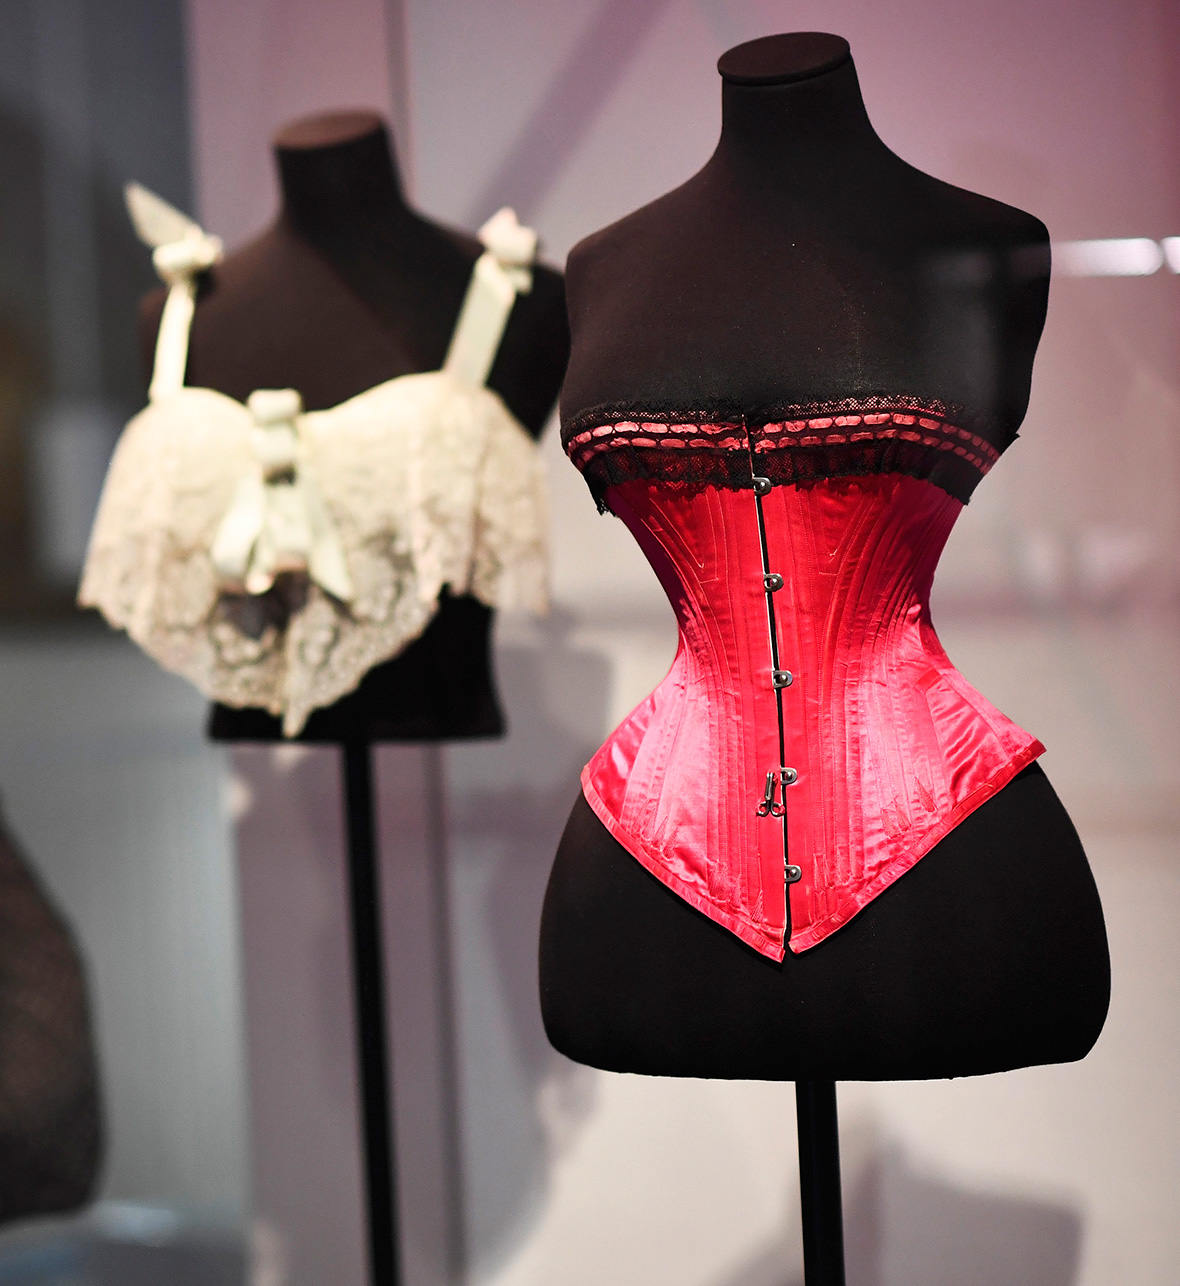 Undressed: A Brief History of Underwear to appear at Victoria and